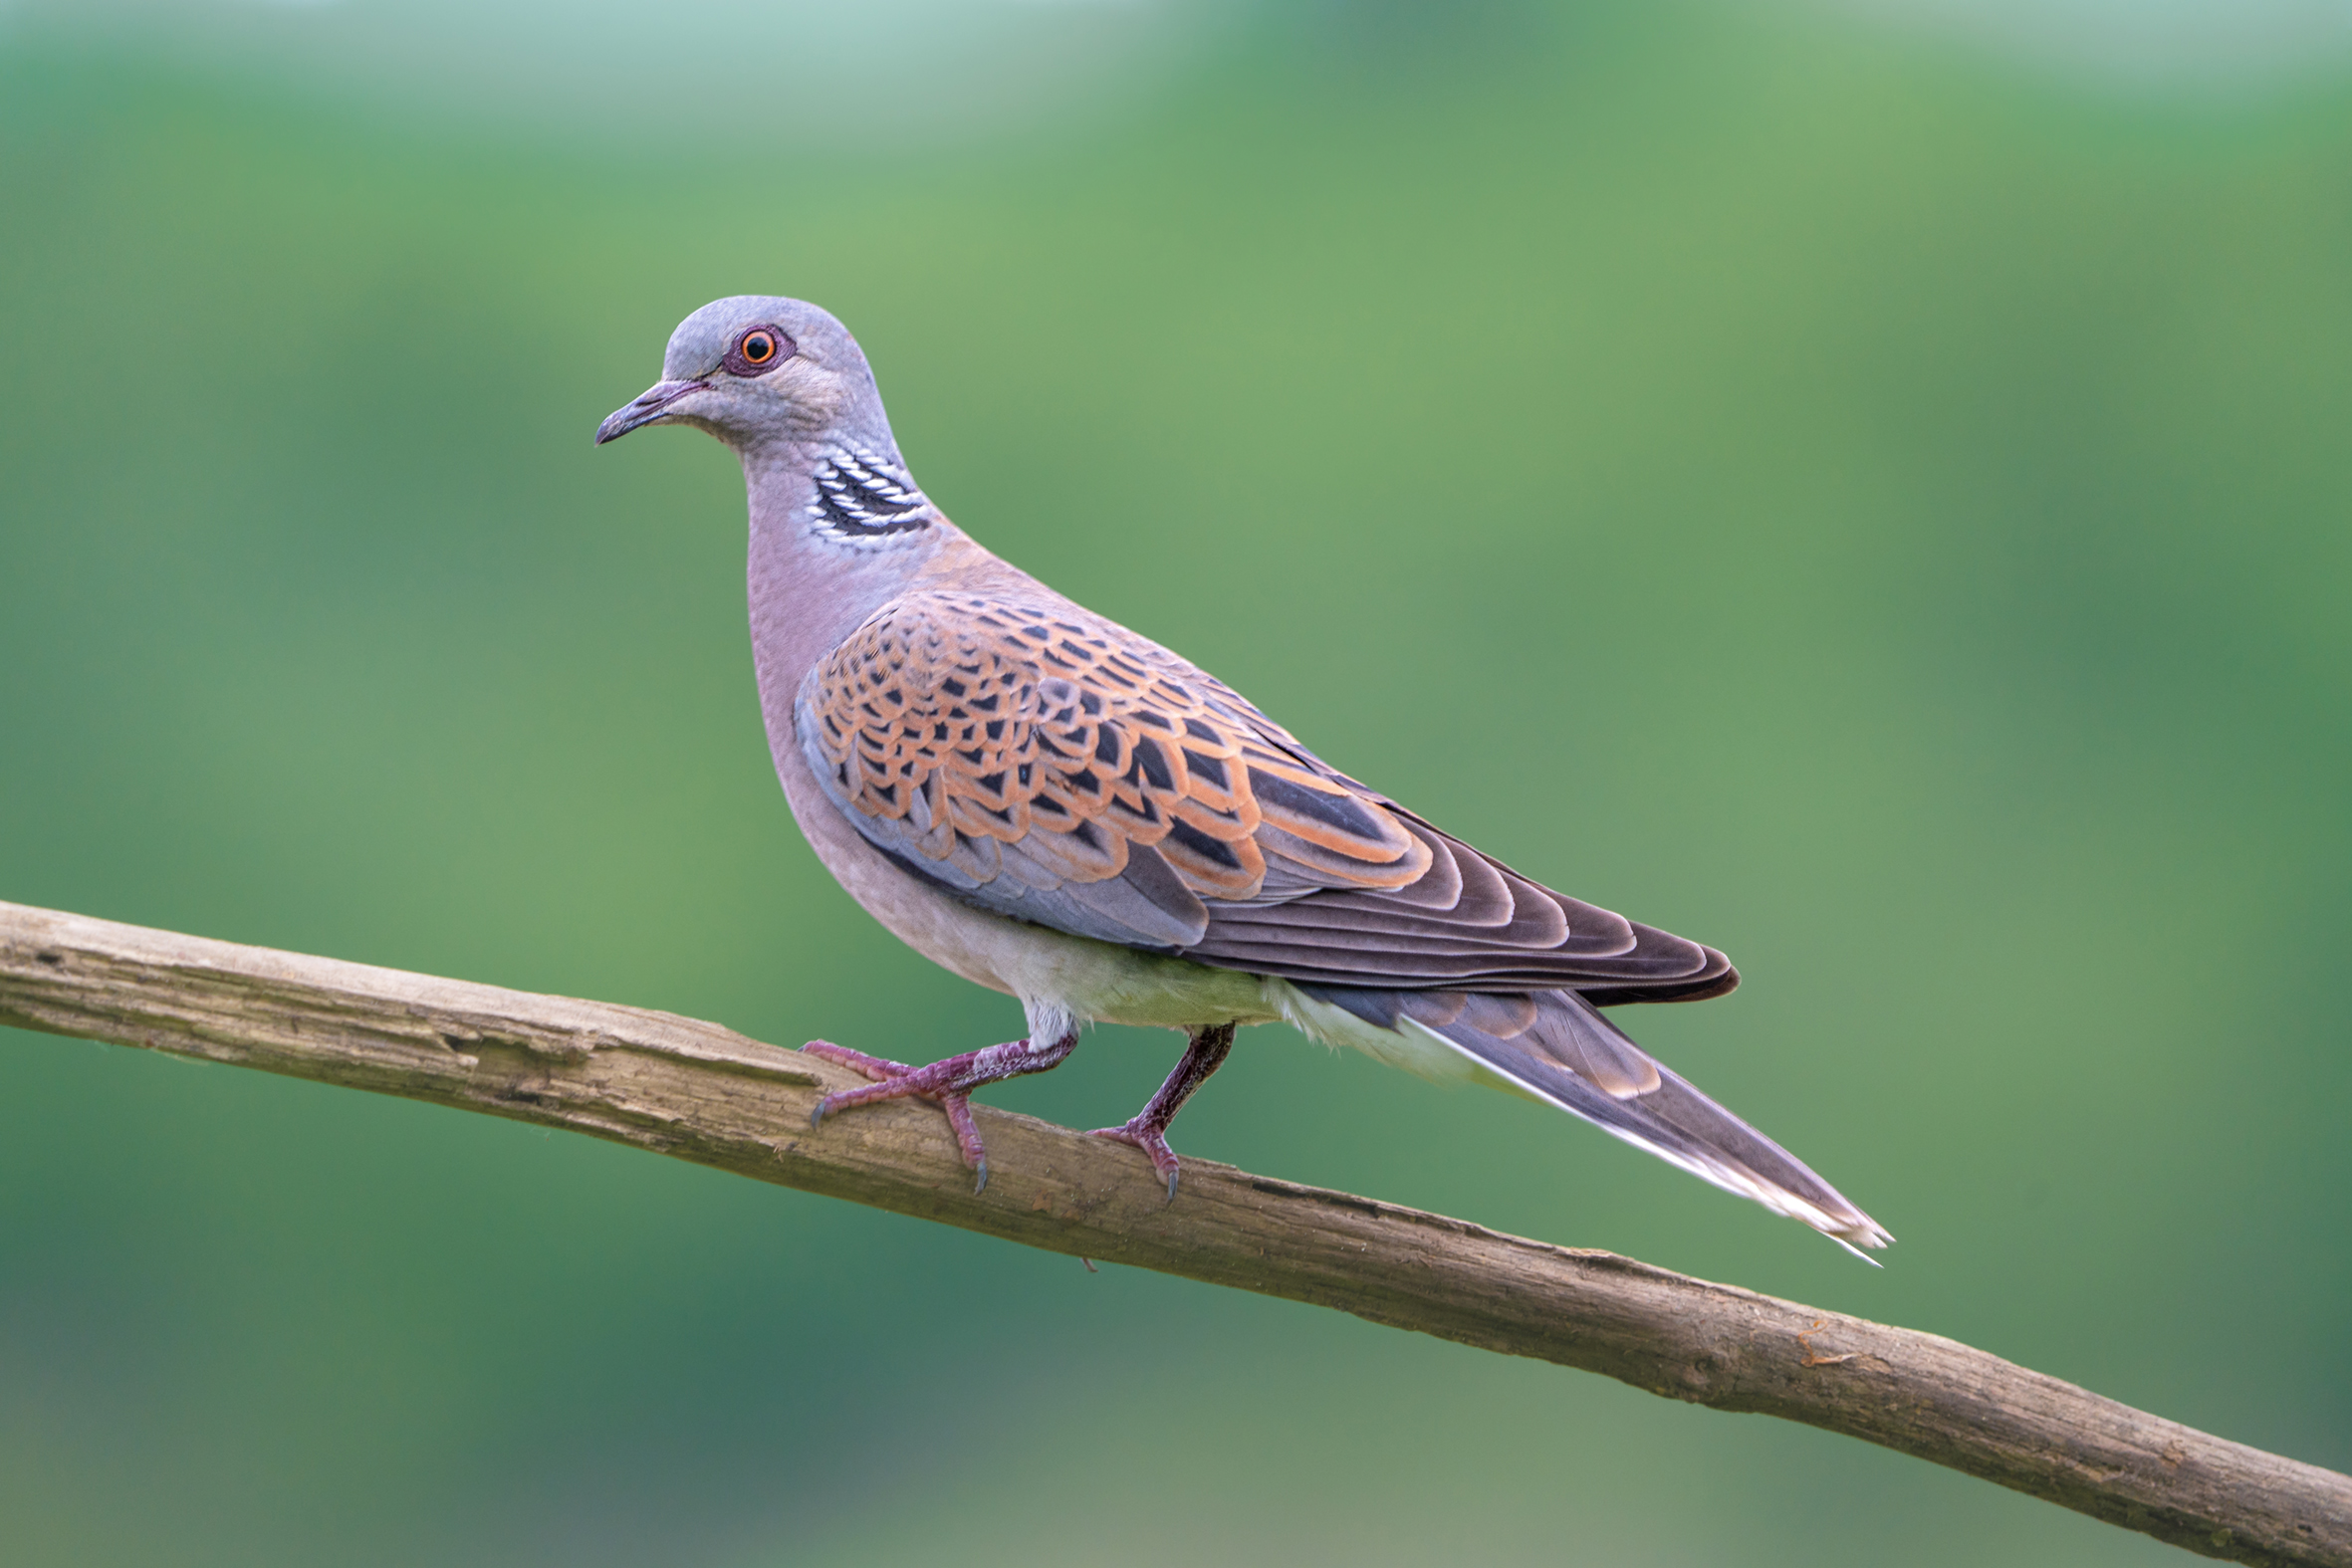 UK wildlife suffering 'downward pattern of decline' in biodiversity, review  says, as it identifies species like turtle dove and hazel dormouse in  danger, Climate News